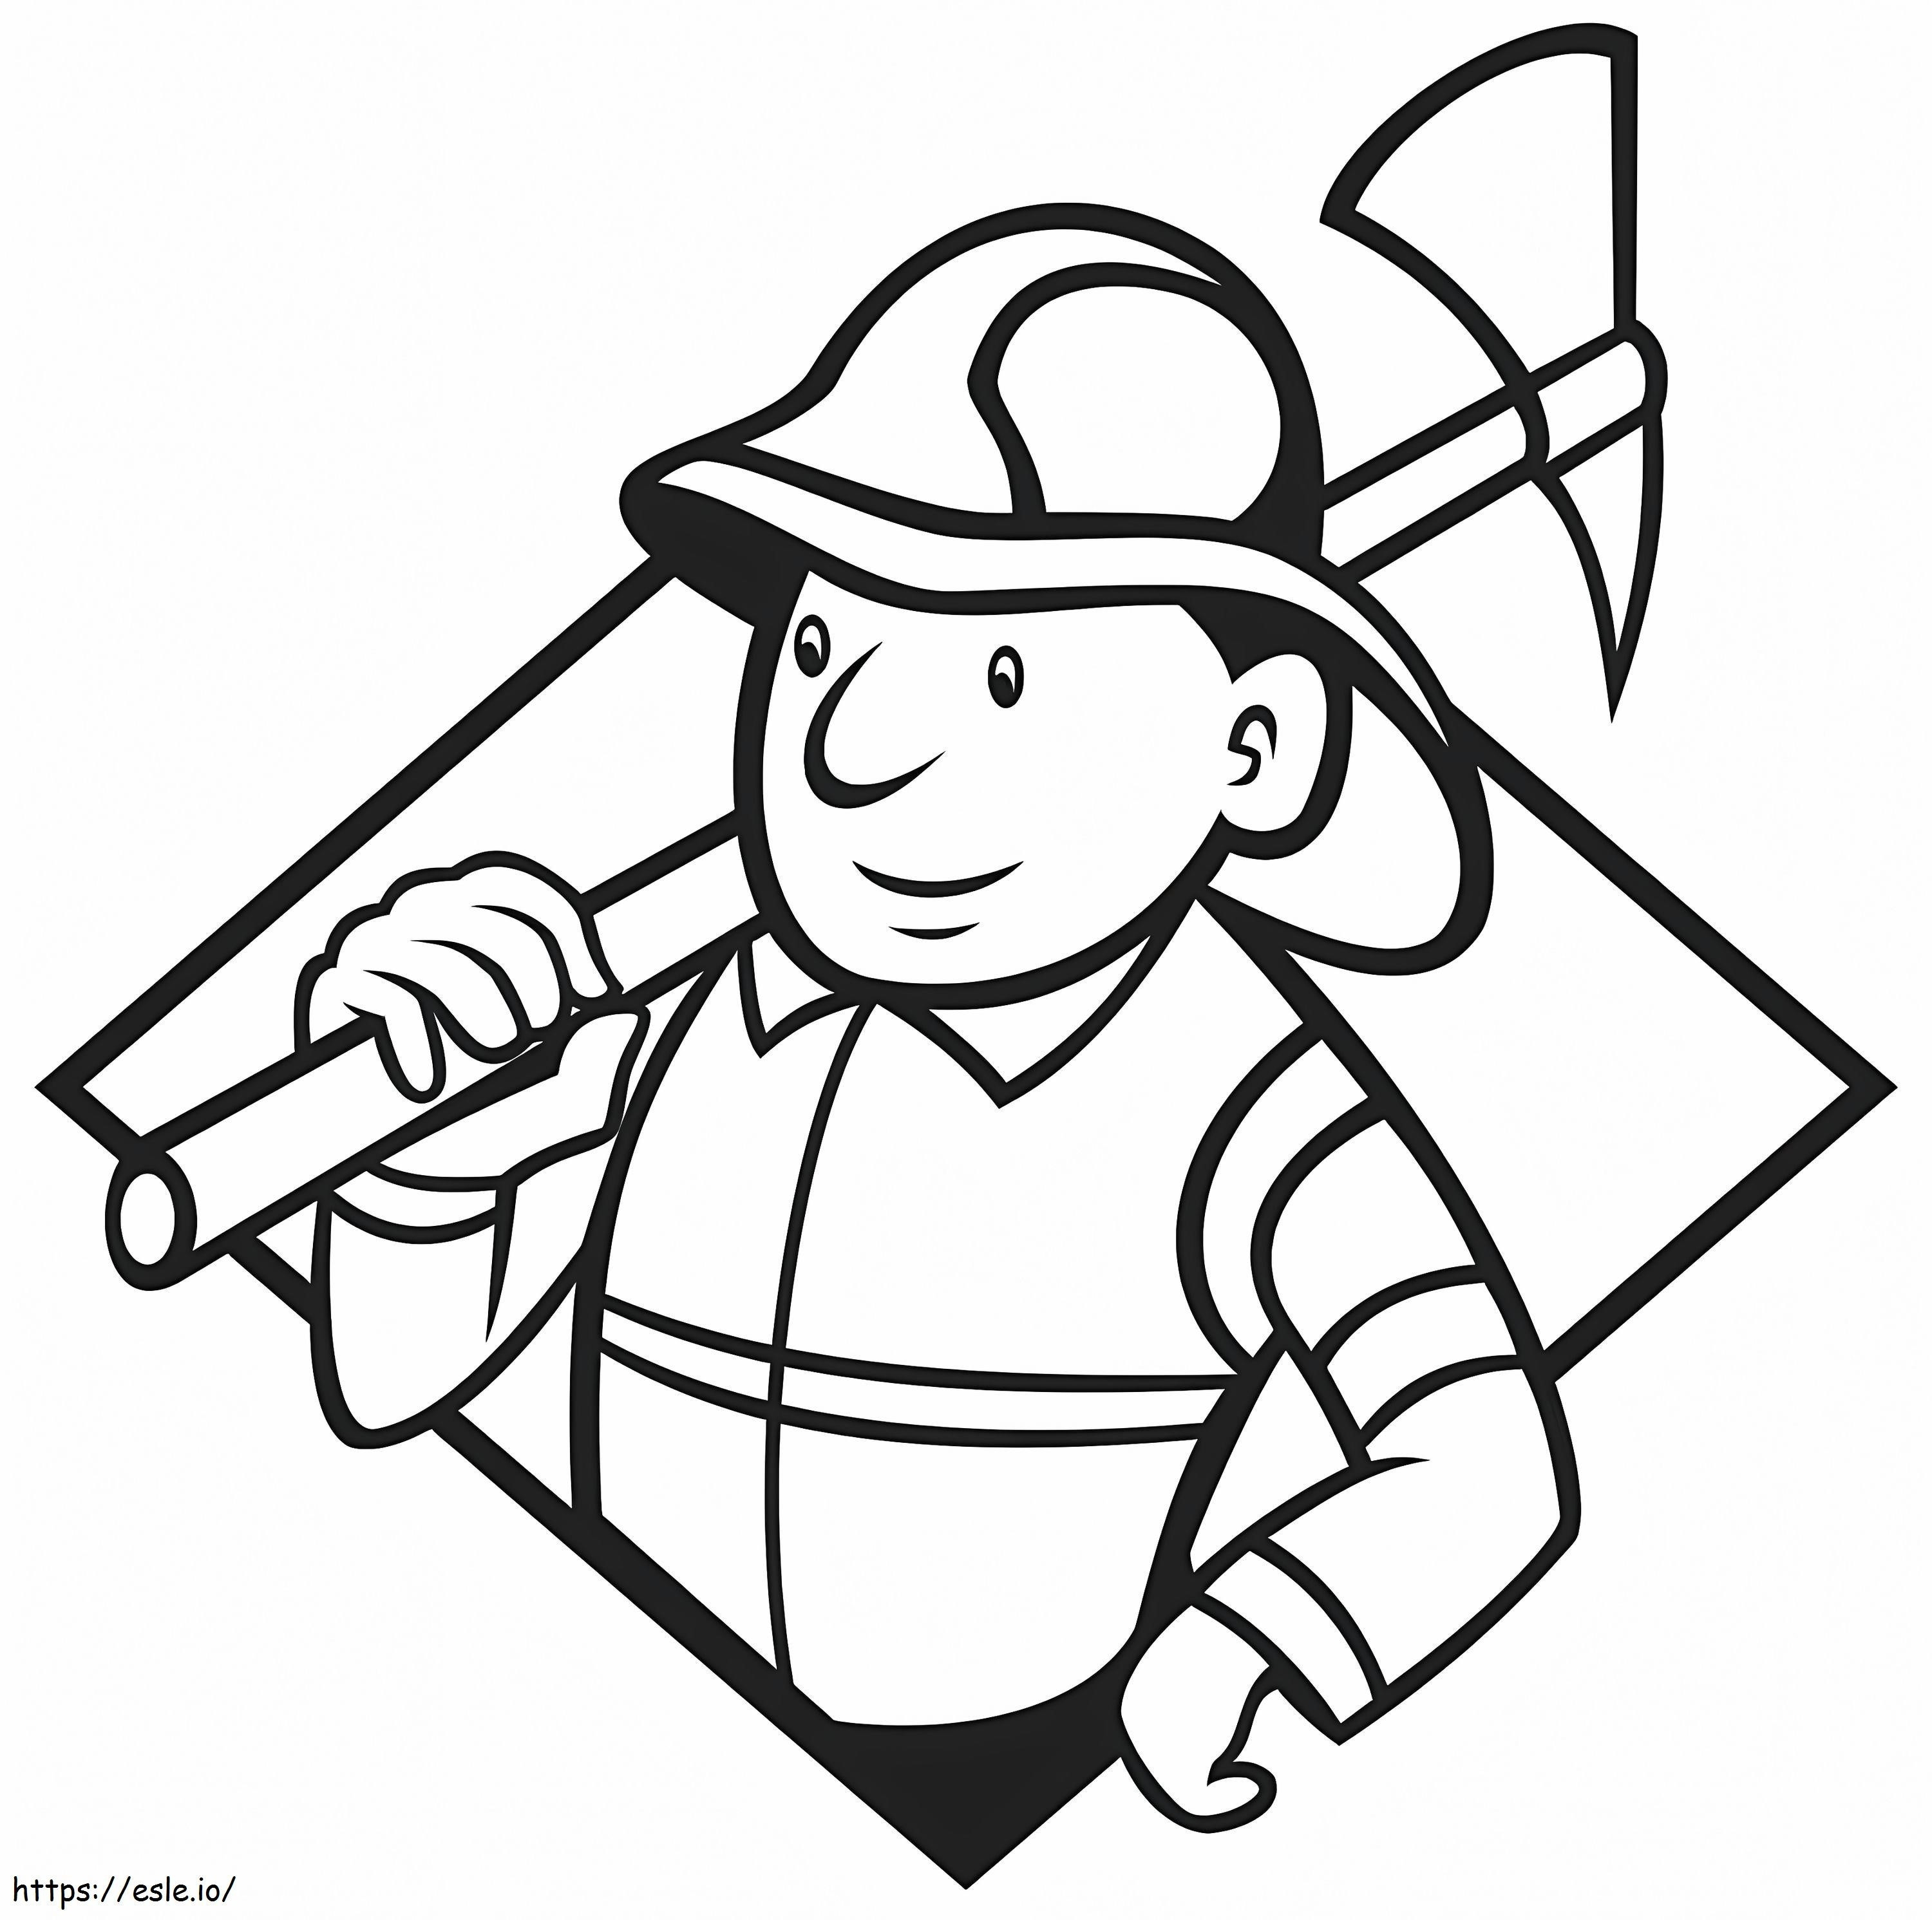 Firefighter With Axe coloring page